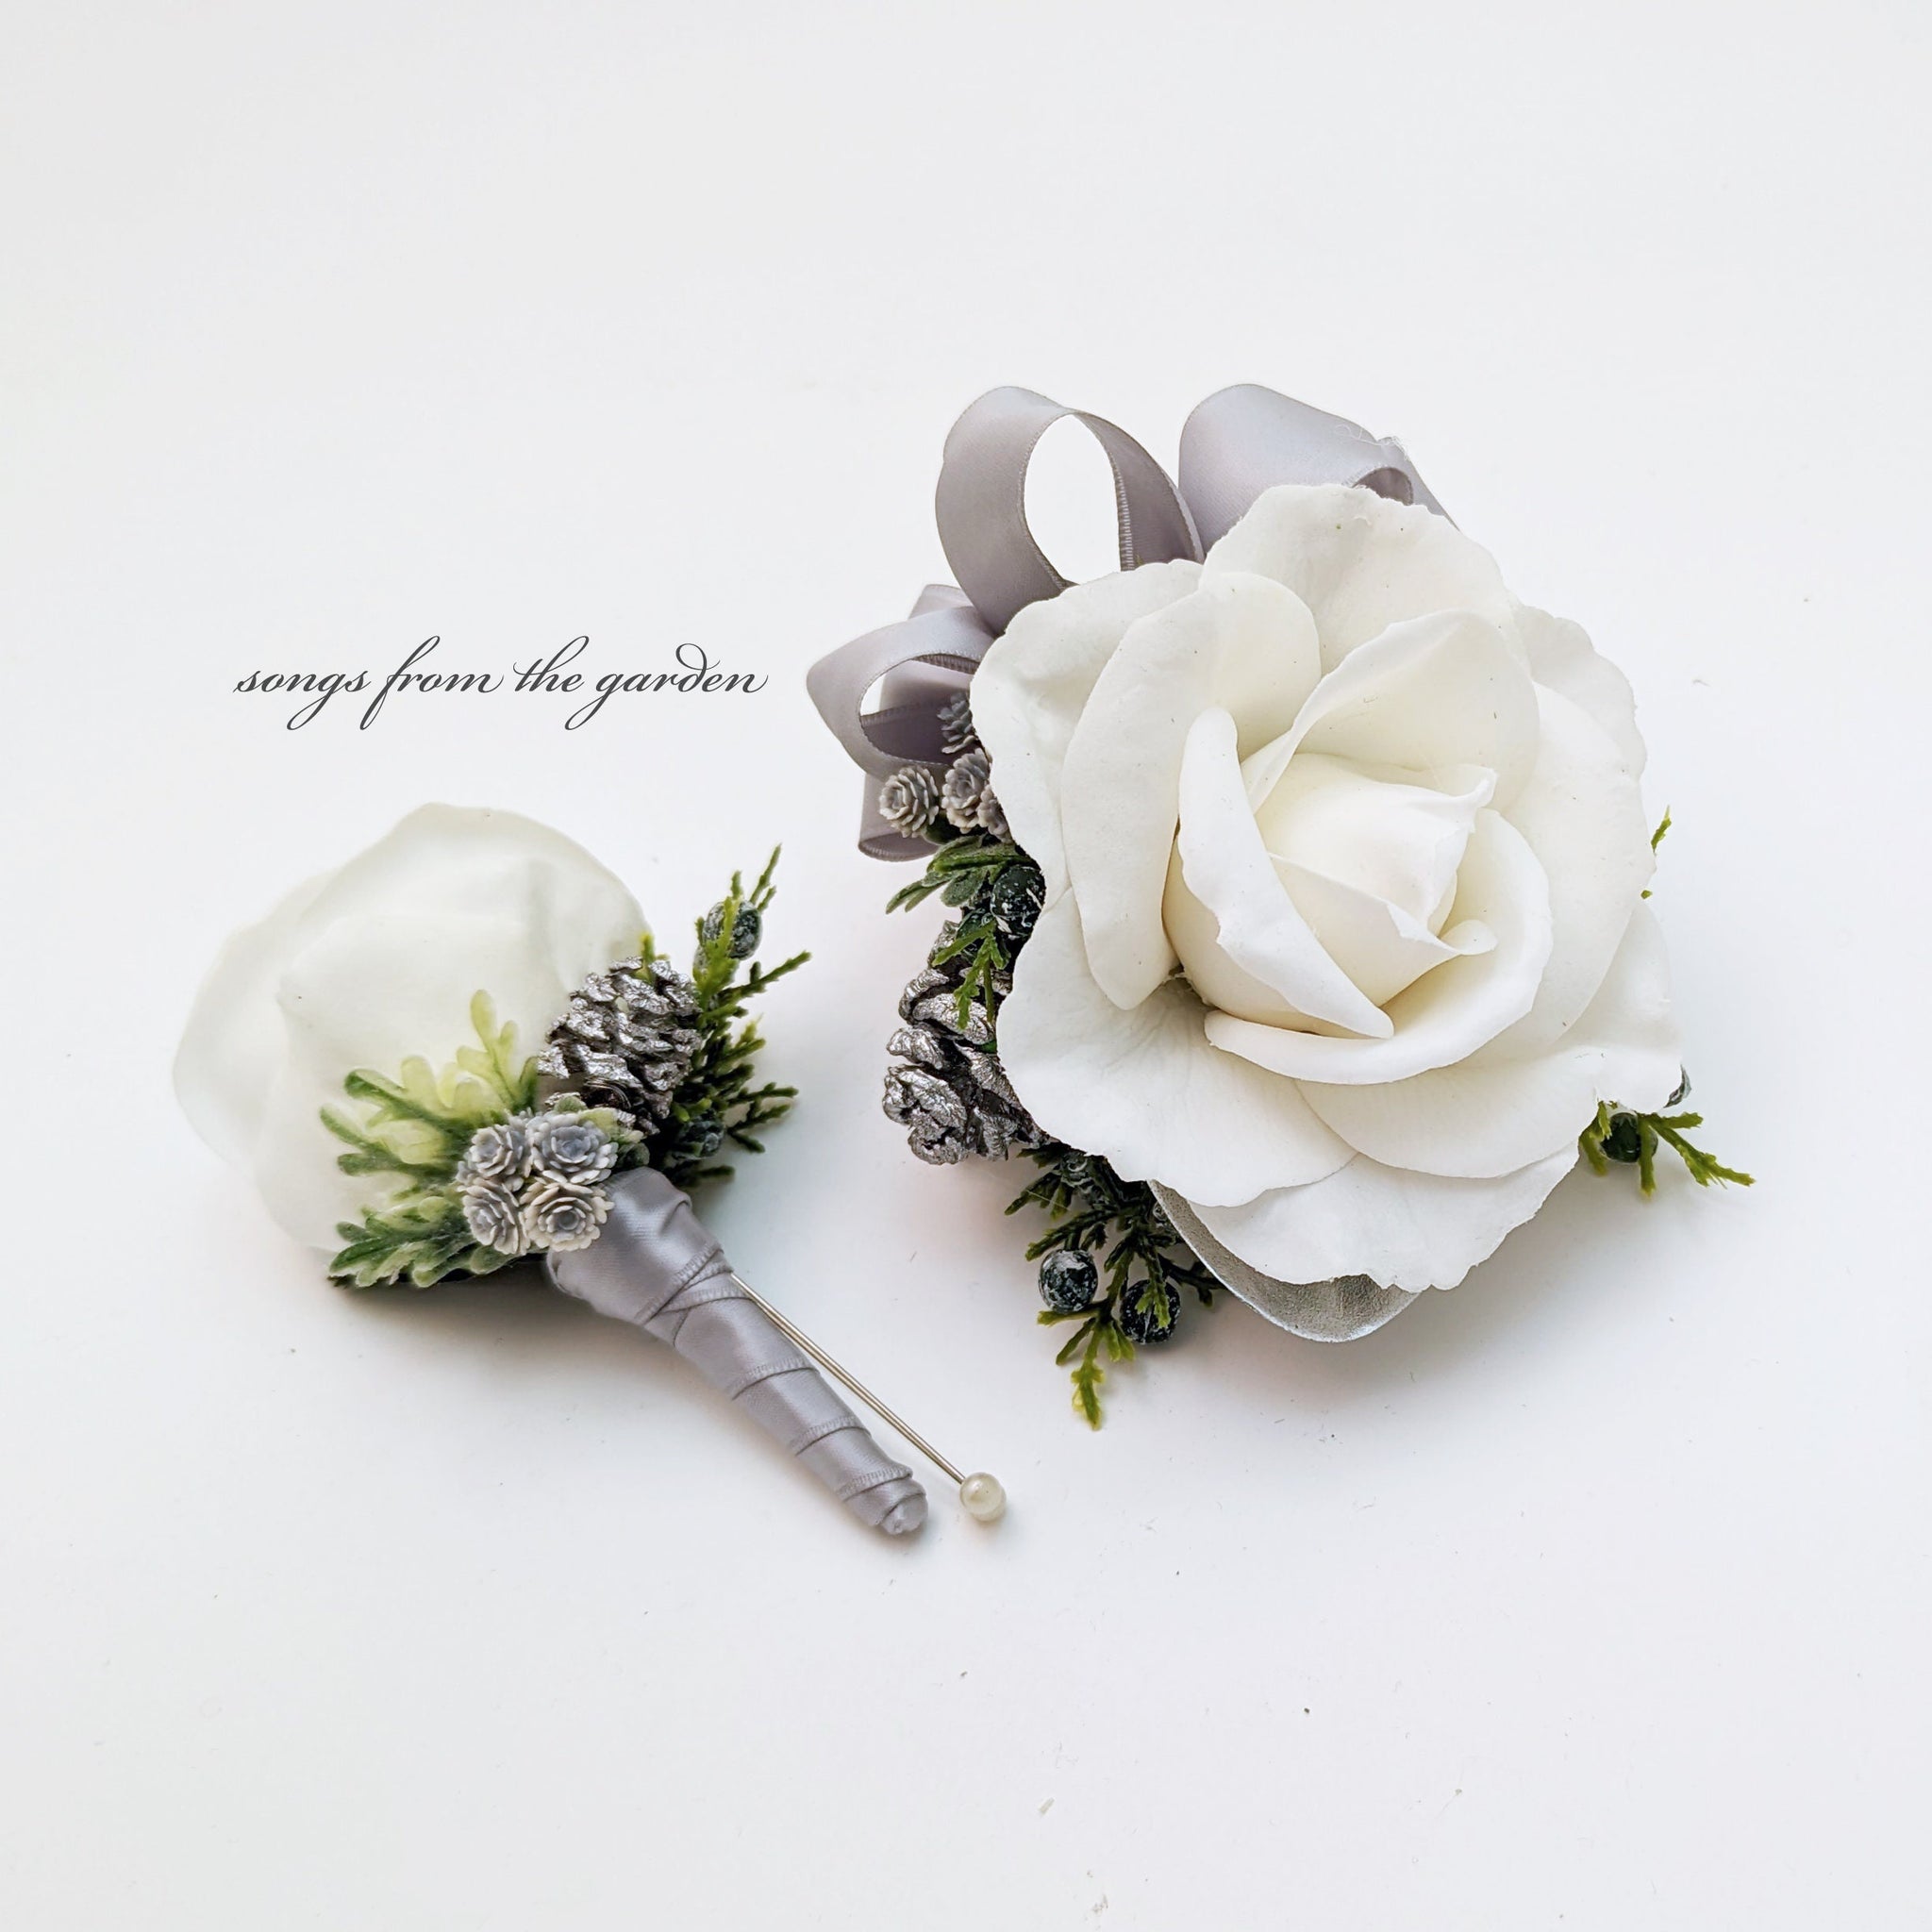 Winter Boutonniere or Corsage  - Silver White Real Touch Rose Pinecone Evergreen Babys Breath Accents - Wedding Prom Homecoming Boutonniere